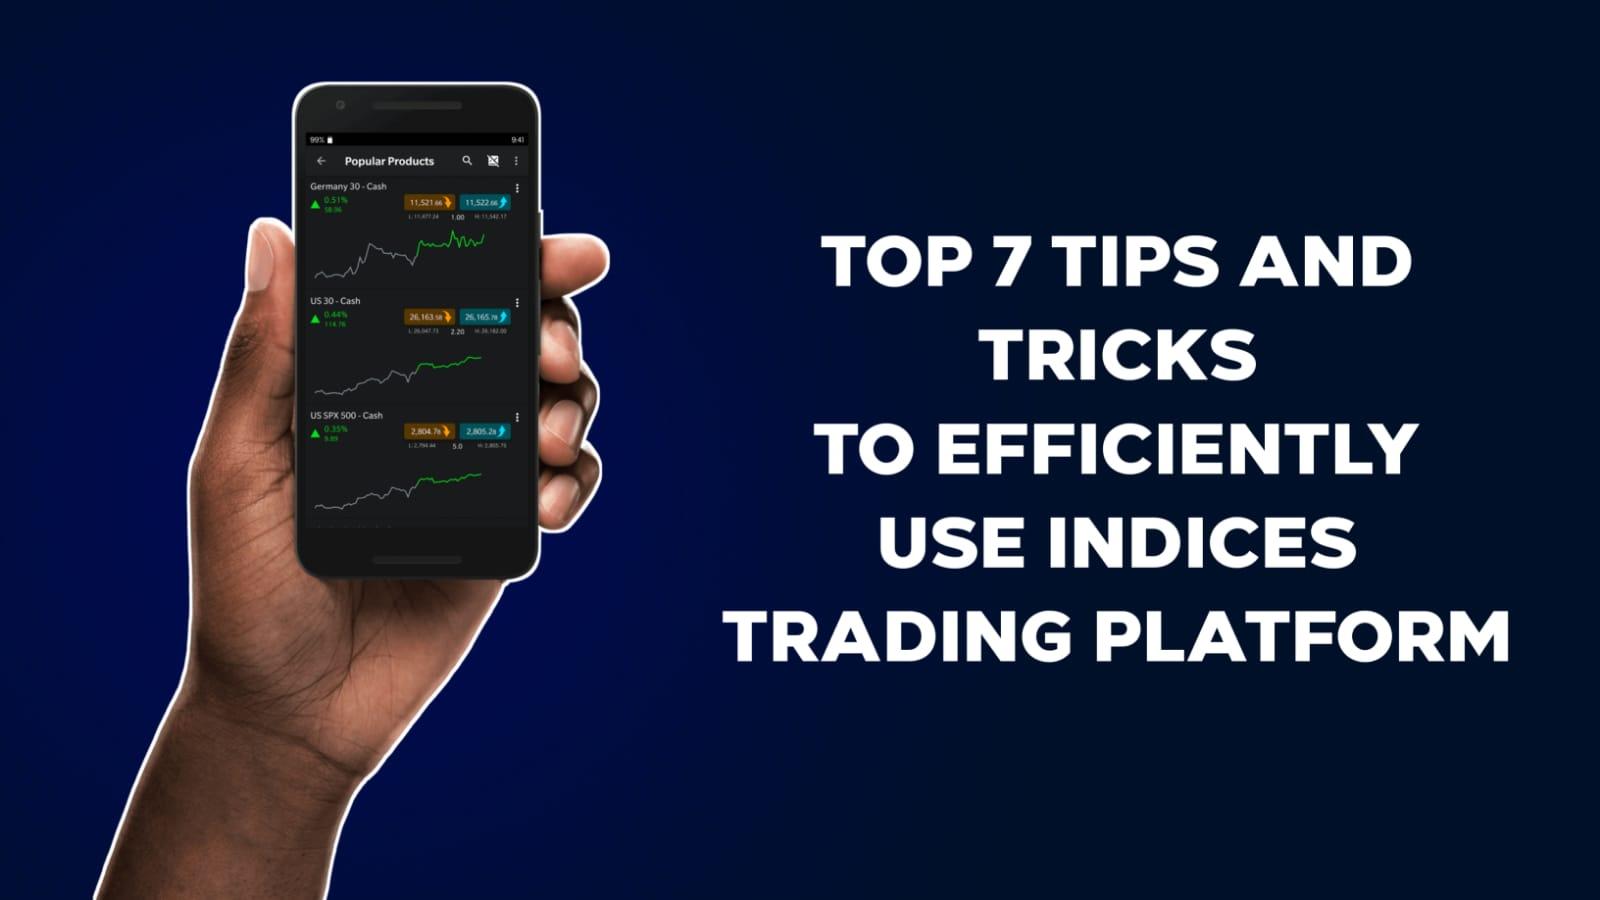 Top 7 Tips and Tricks to Efficiently Use Indices Trading Platform